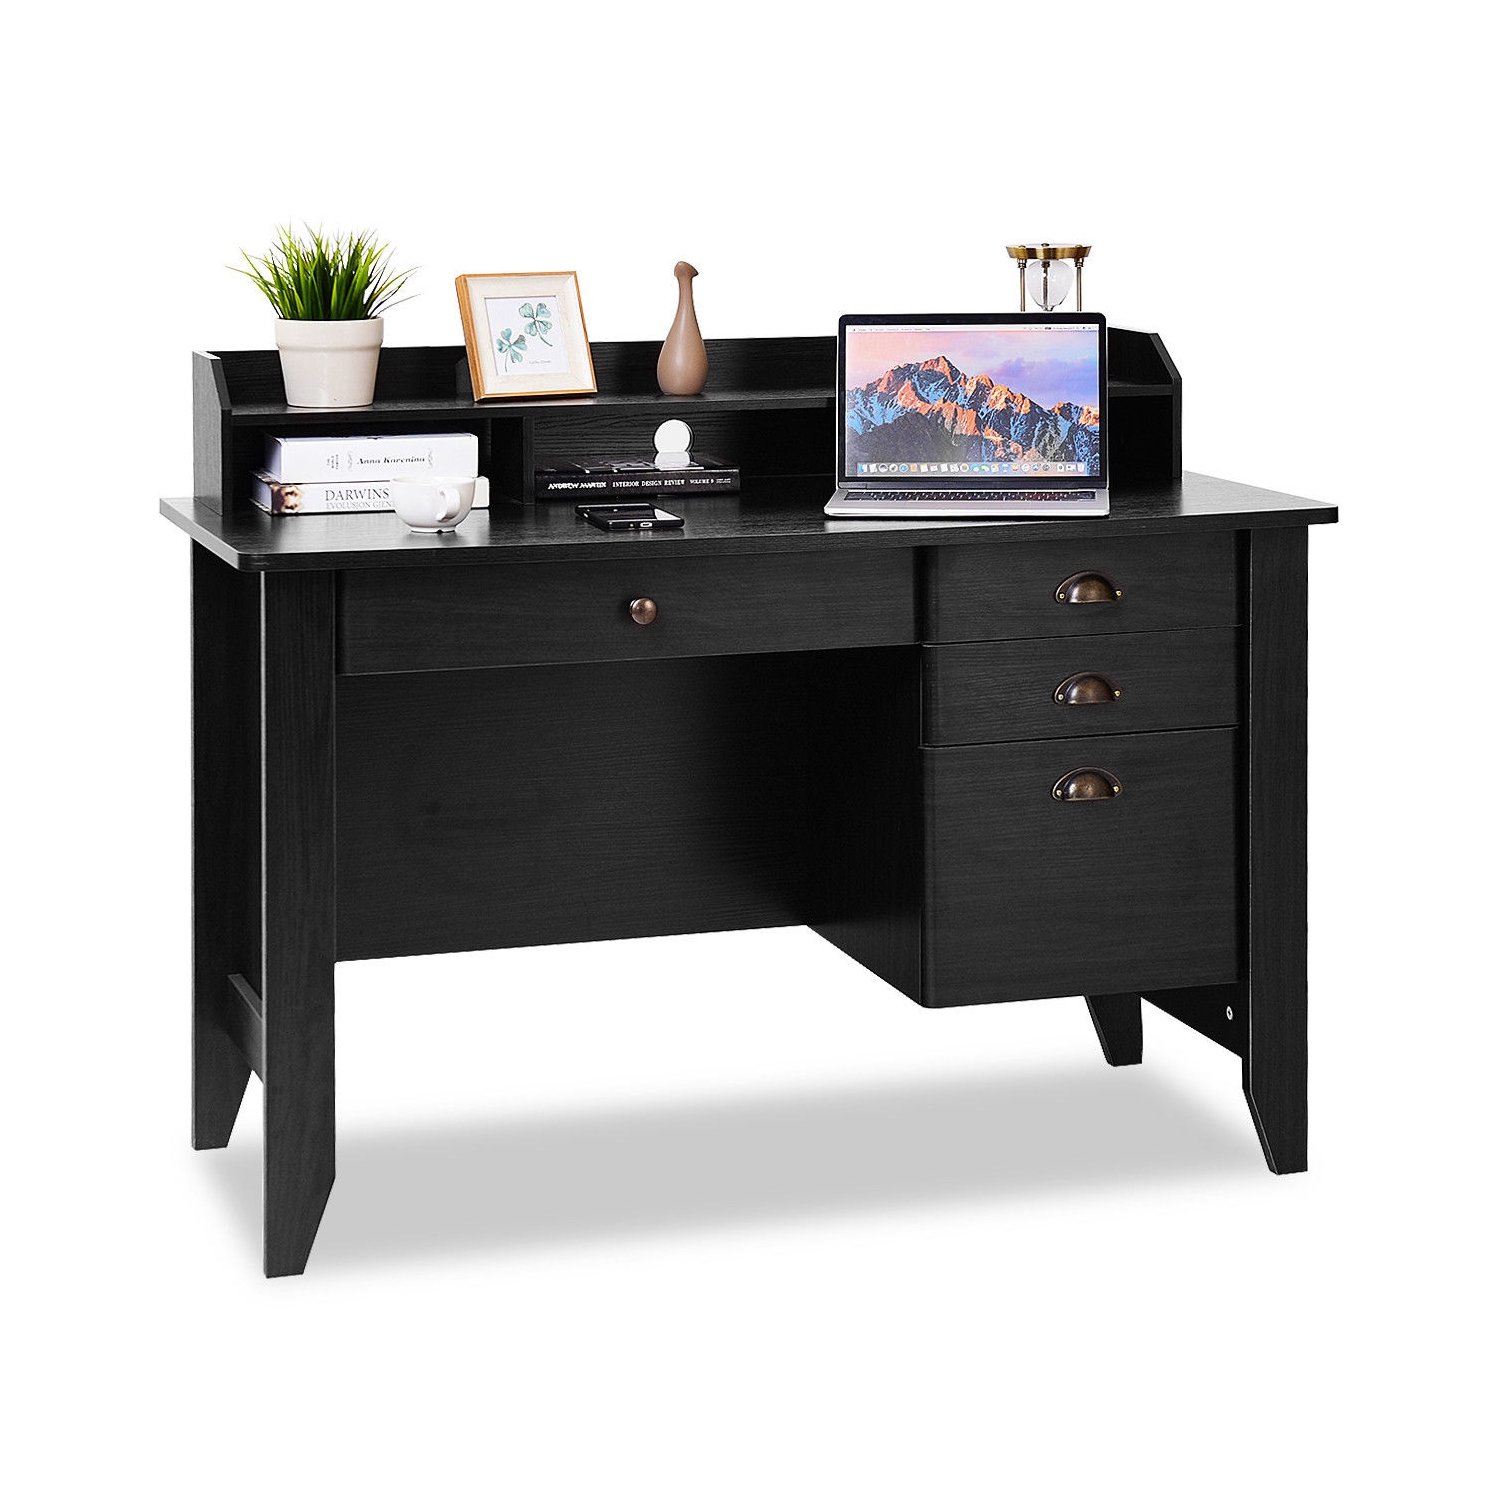 Costway Computer Computer Desk PC Laptop Writing Table Workstation Student Study Furniture Black